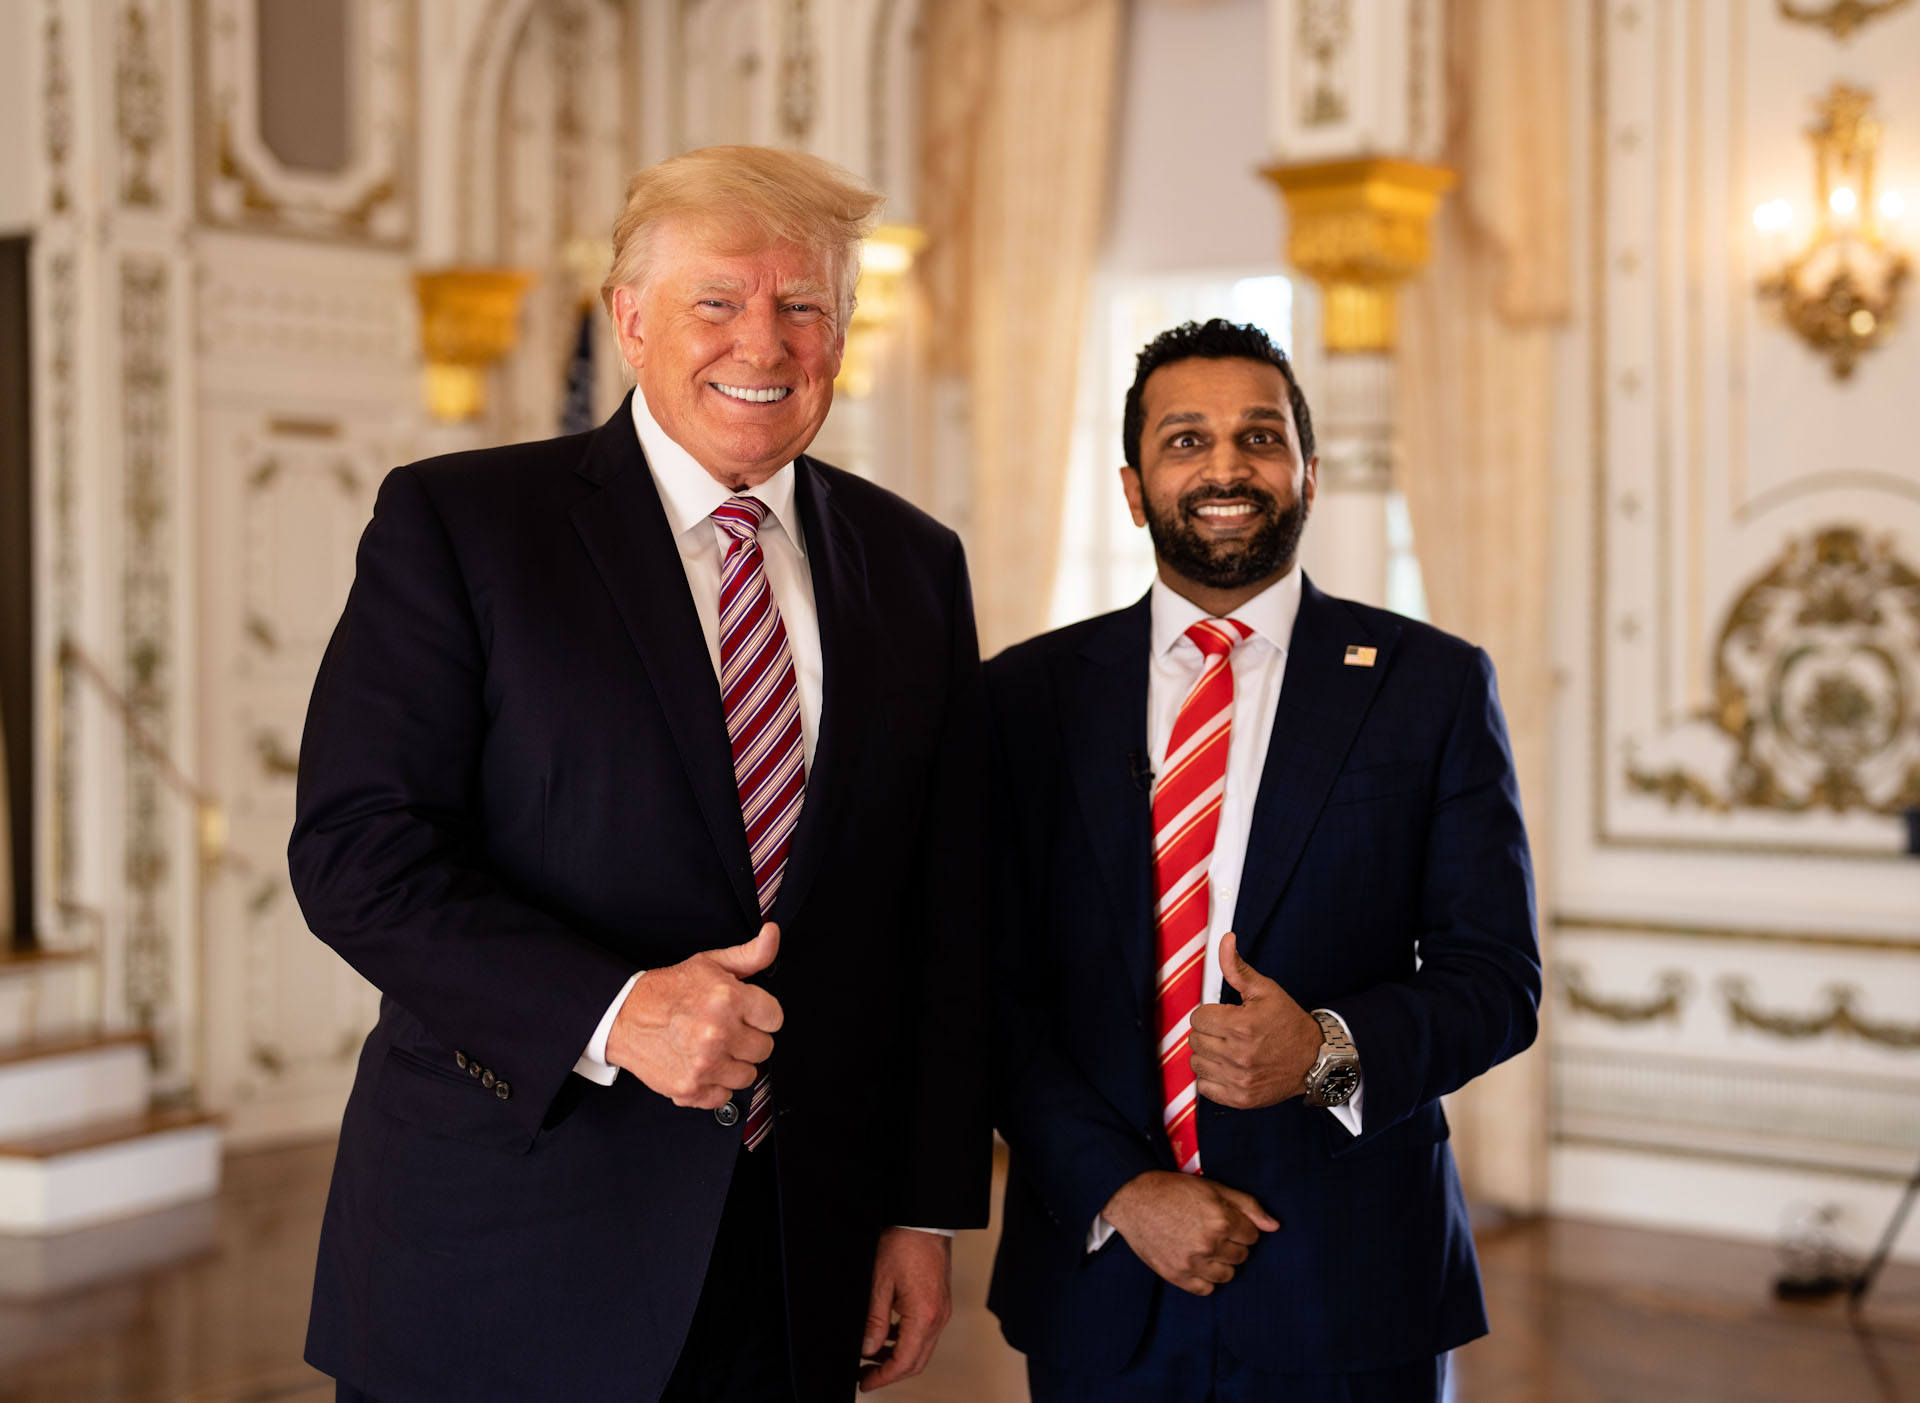 President Trump and Kash Patel in the Whitehouse